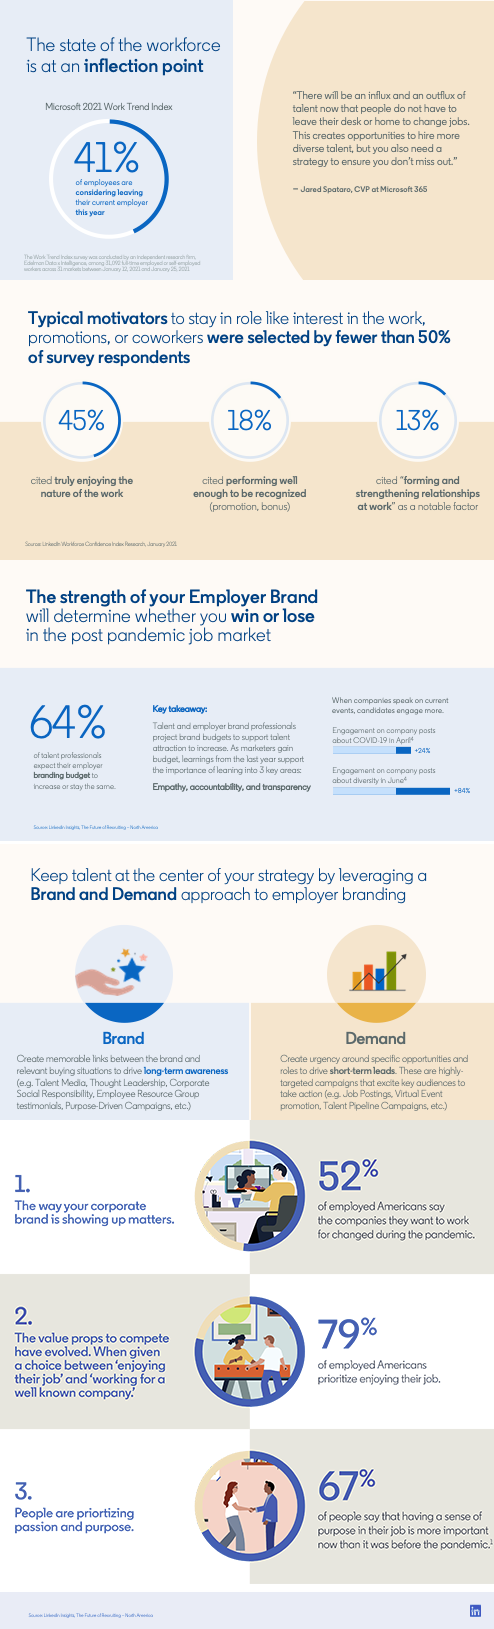 linkedin provides tips on how to make your employer brand stand out infographic